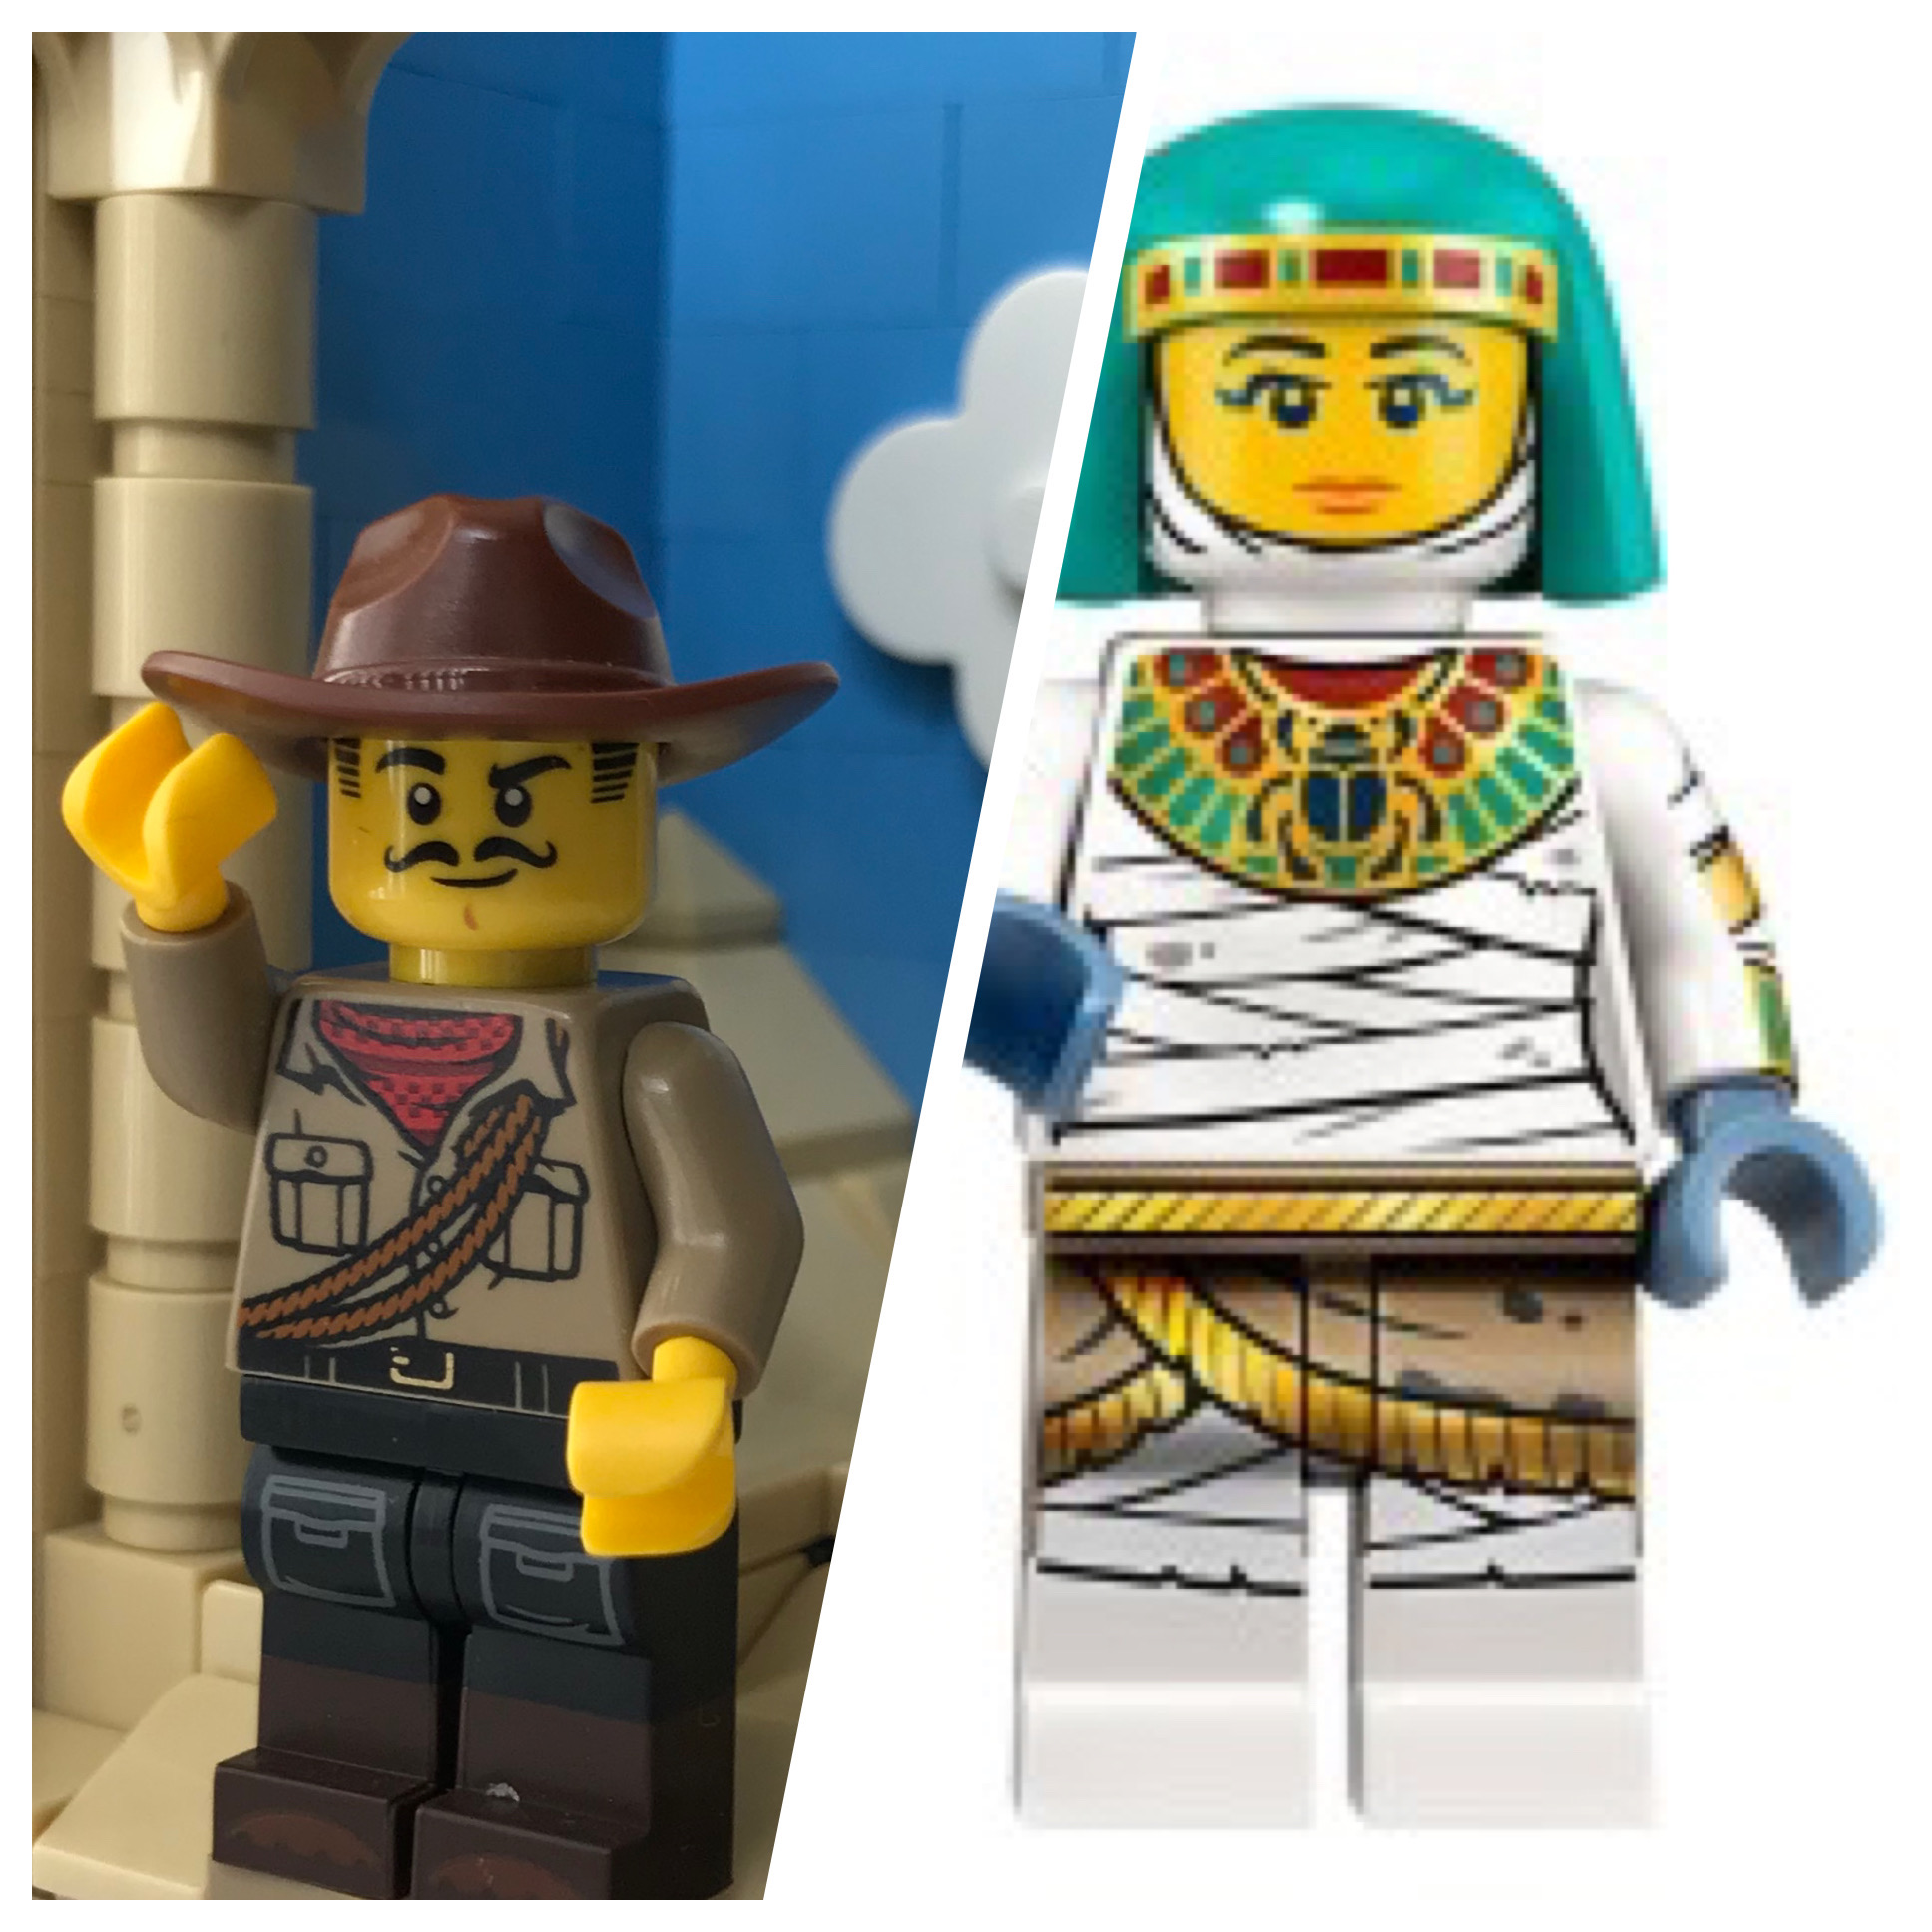 Collage of a photo of Johnny Thunder minifig from CMF 19 in a custom habitat and a digital rendering of the Mummy minifig from CMF 19